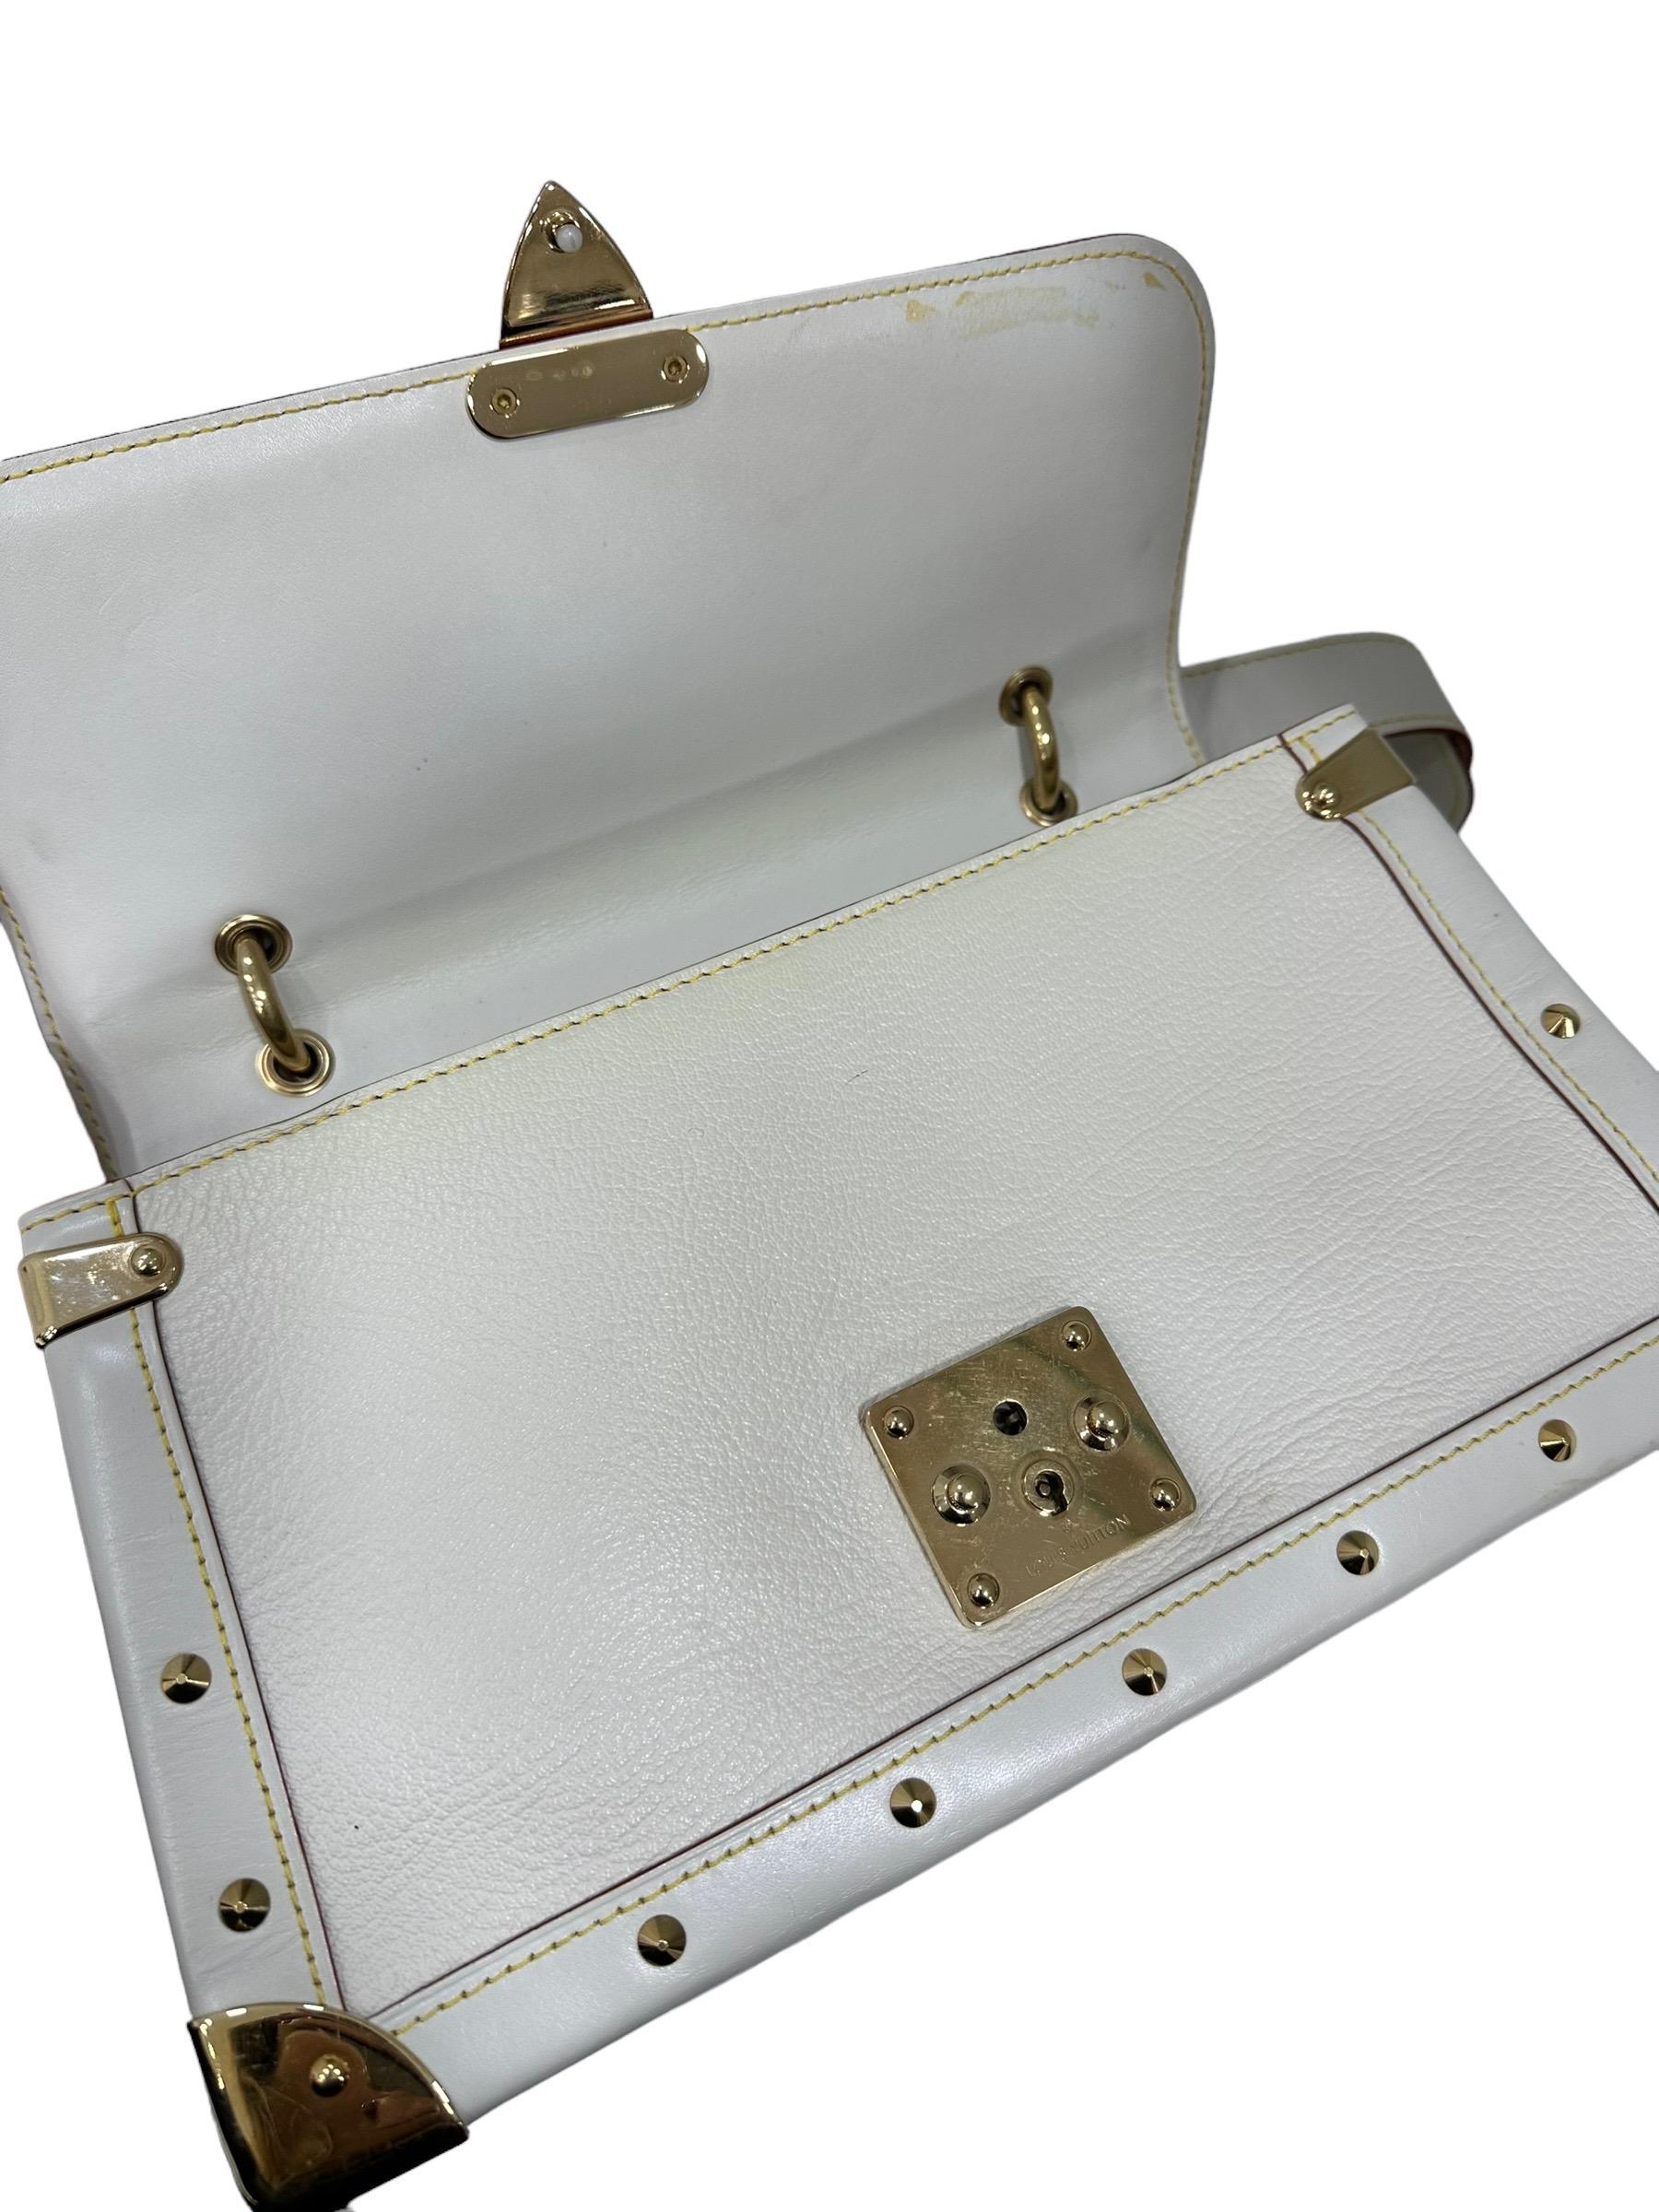 Louis Vuitton Le Talentueux Top Handle Bag White Leather With Gold Hardware For Sale 6